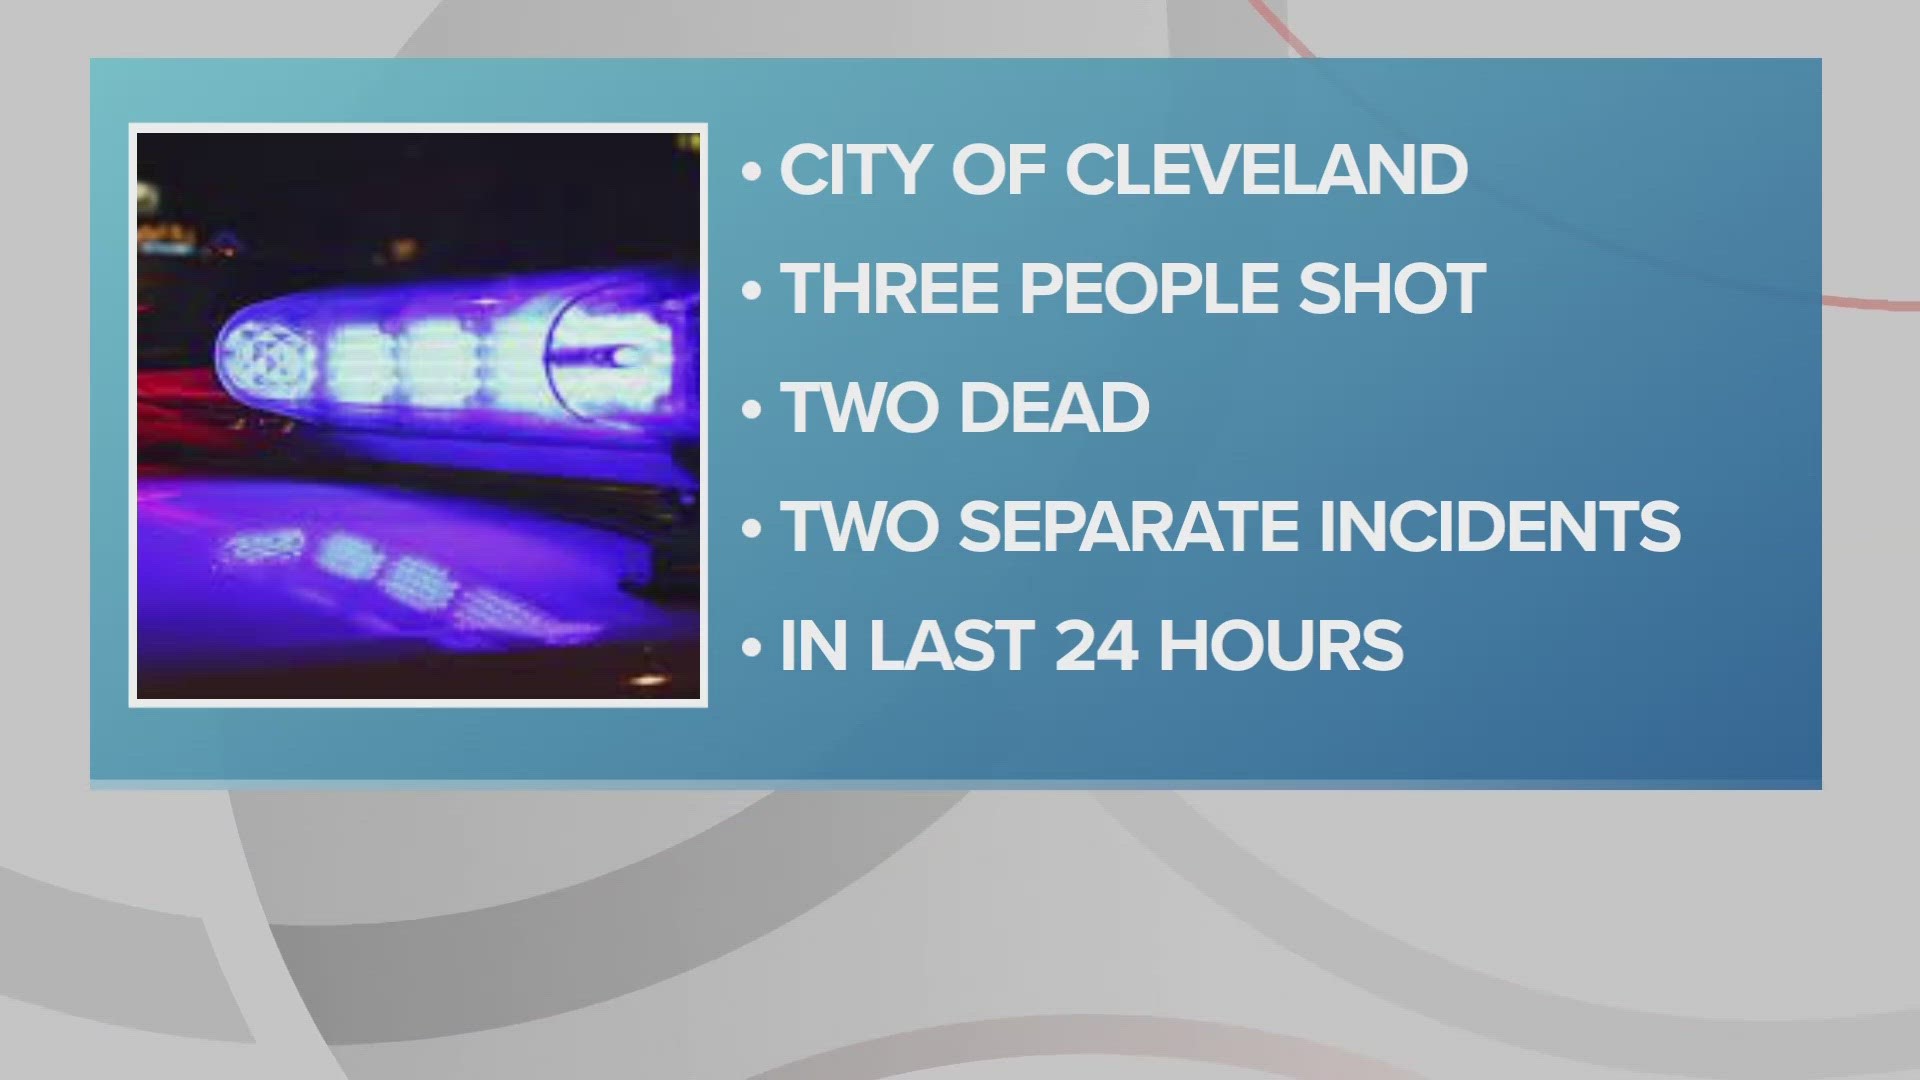 Friday evening's incidents come amid a rash of shootings that have taken place in the last 24 hours in the city.